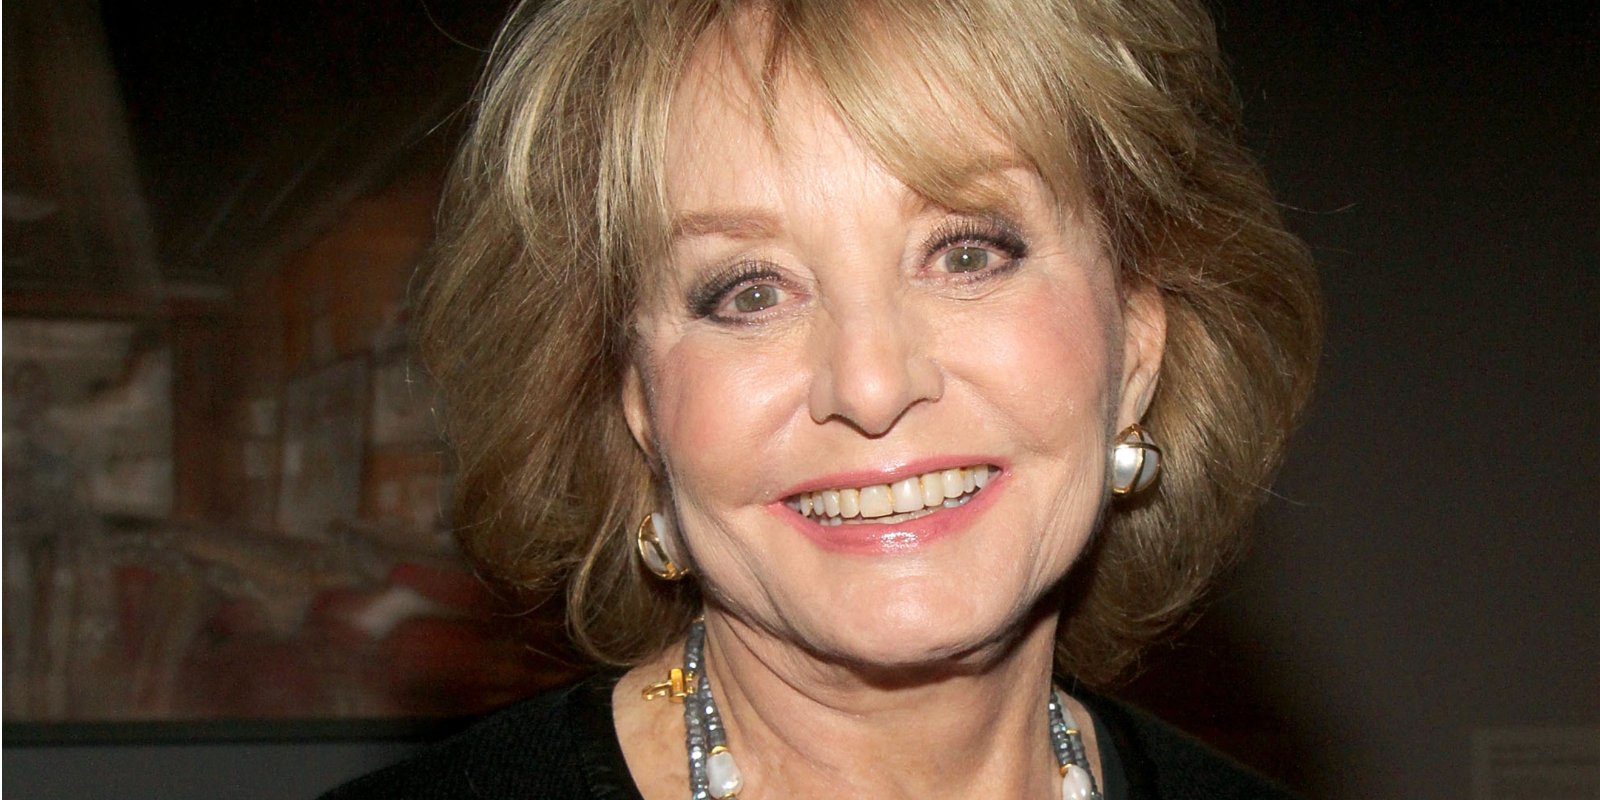 Barbara Walters is photographed at MoMA on October 28, 2013 in New York City.